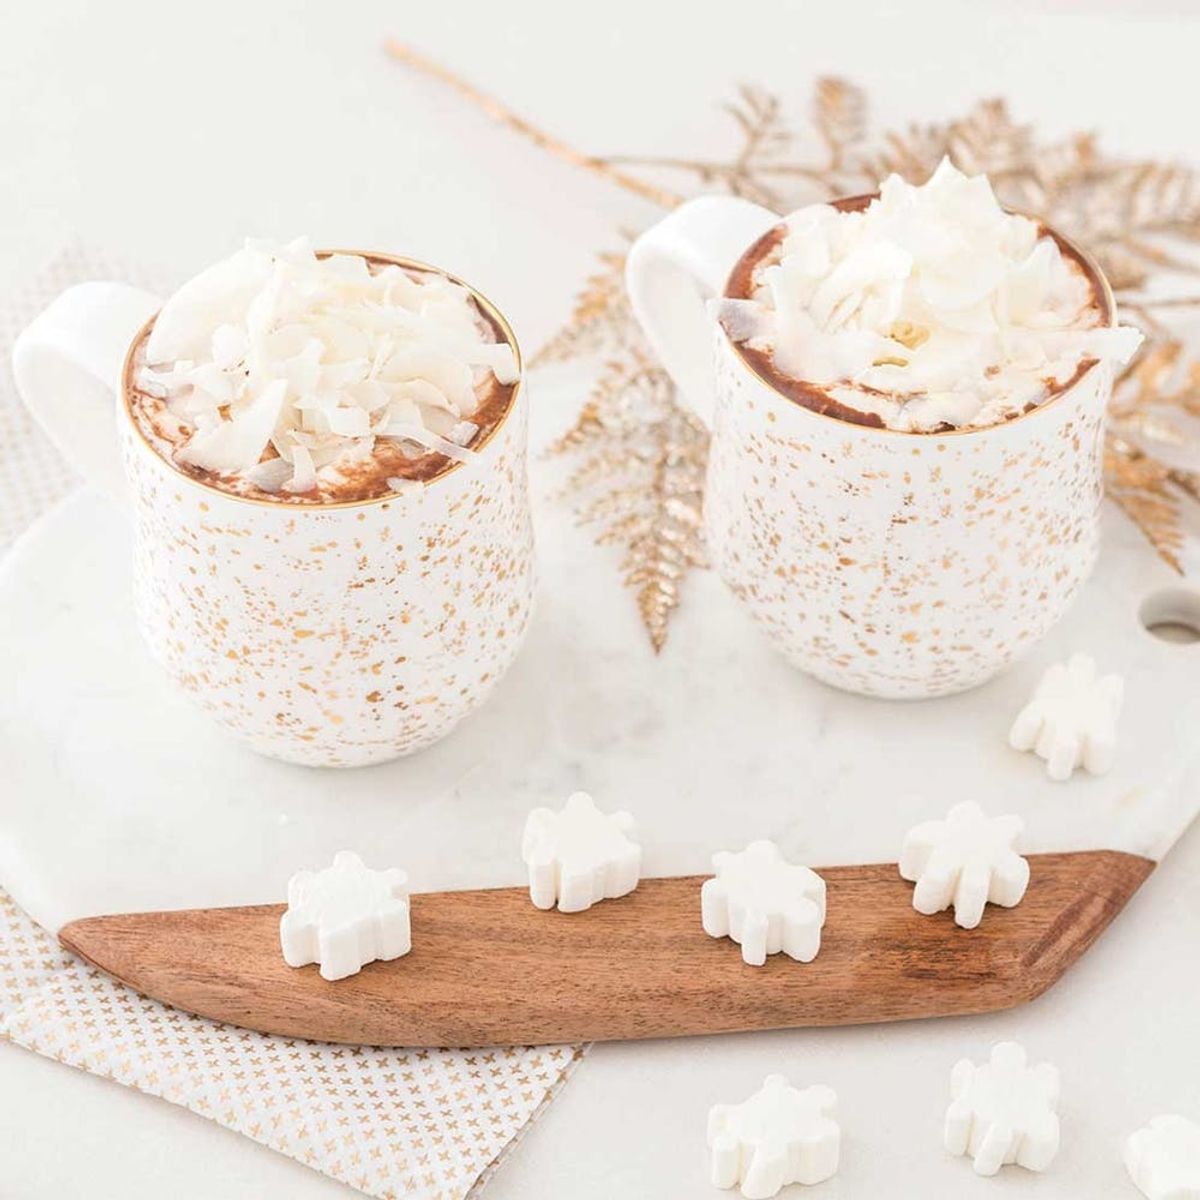 Cozy Up With This Mug of Coconut Milk Hot Cocoa Recipe (Dairy-Free!)